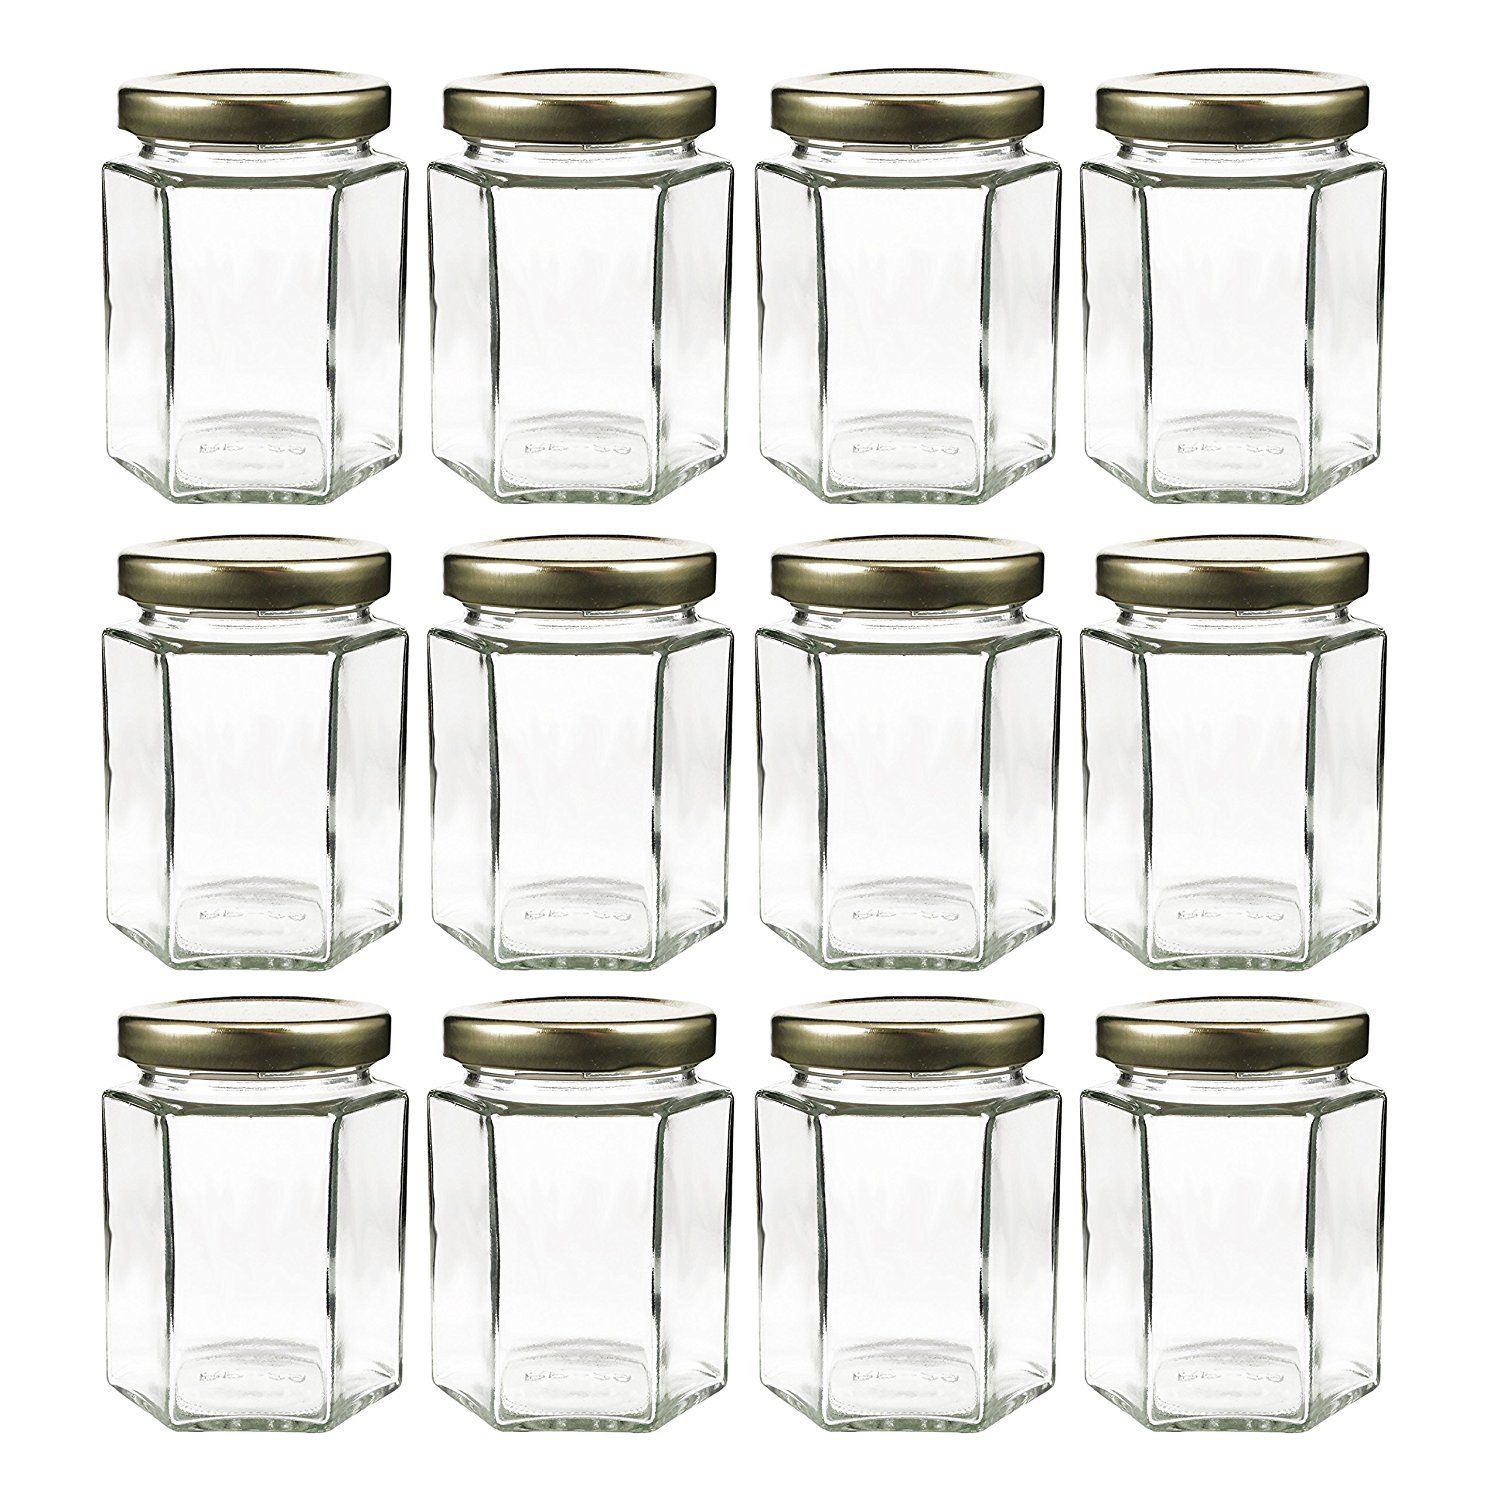 Inexpensive Glass Canisters - Sincerely, Sara D.